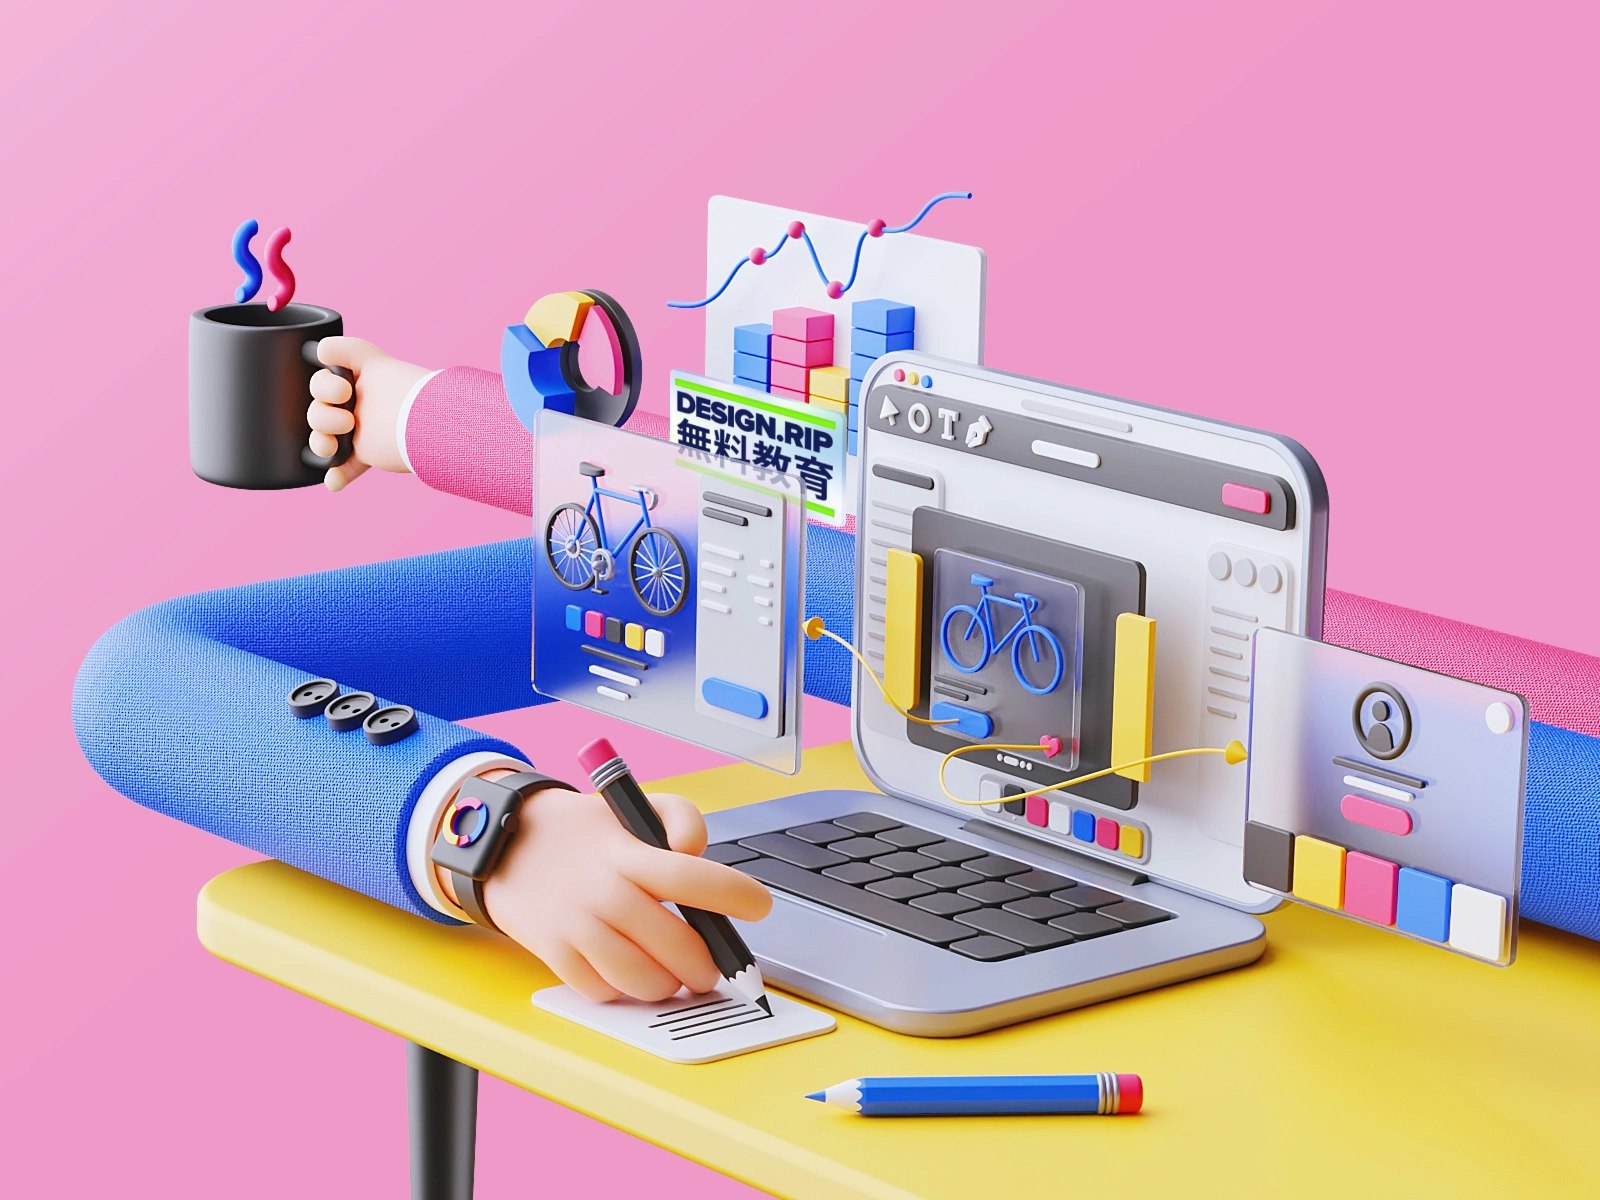 EXCITING NEW TOOLS FOR DESIGNERS